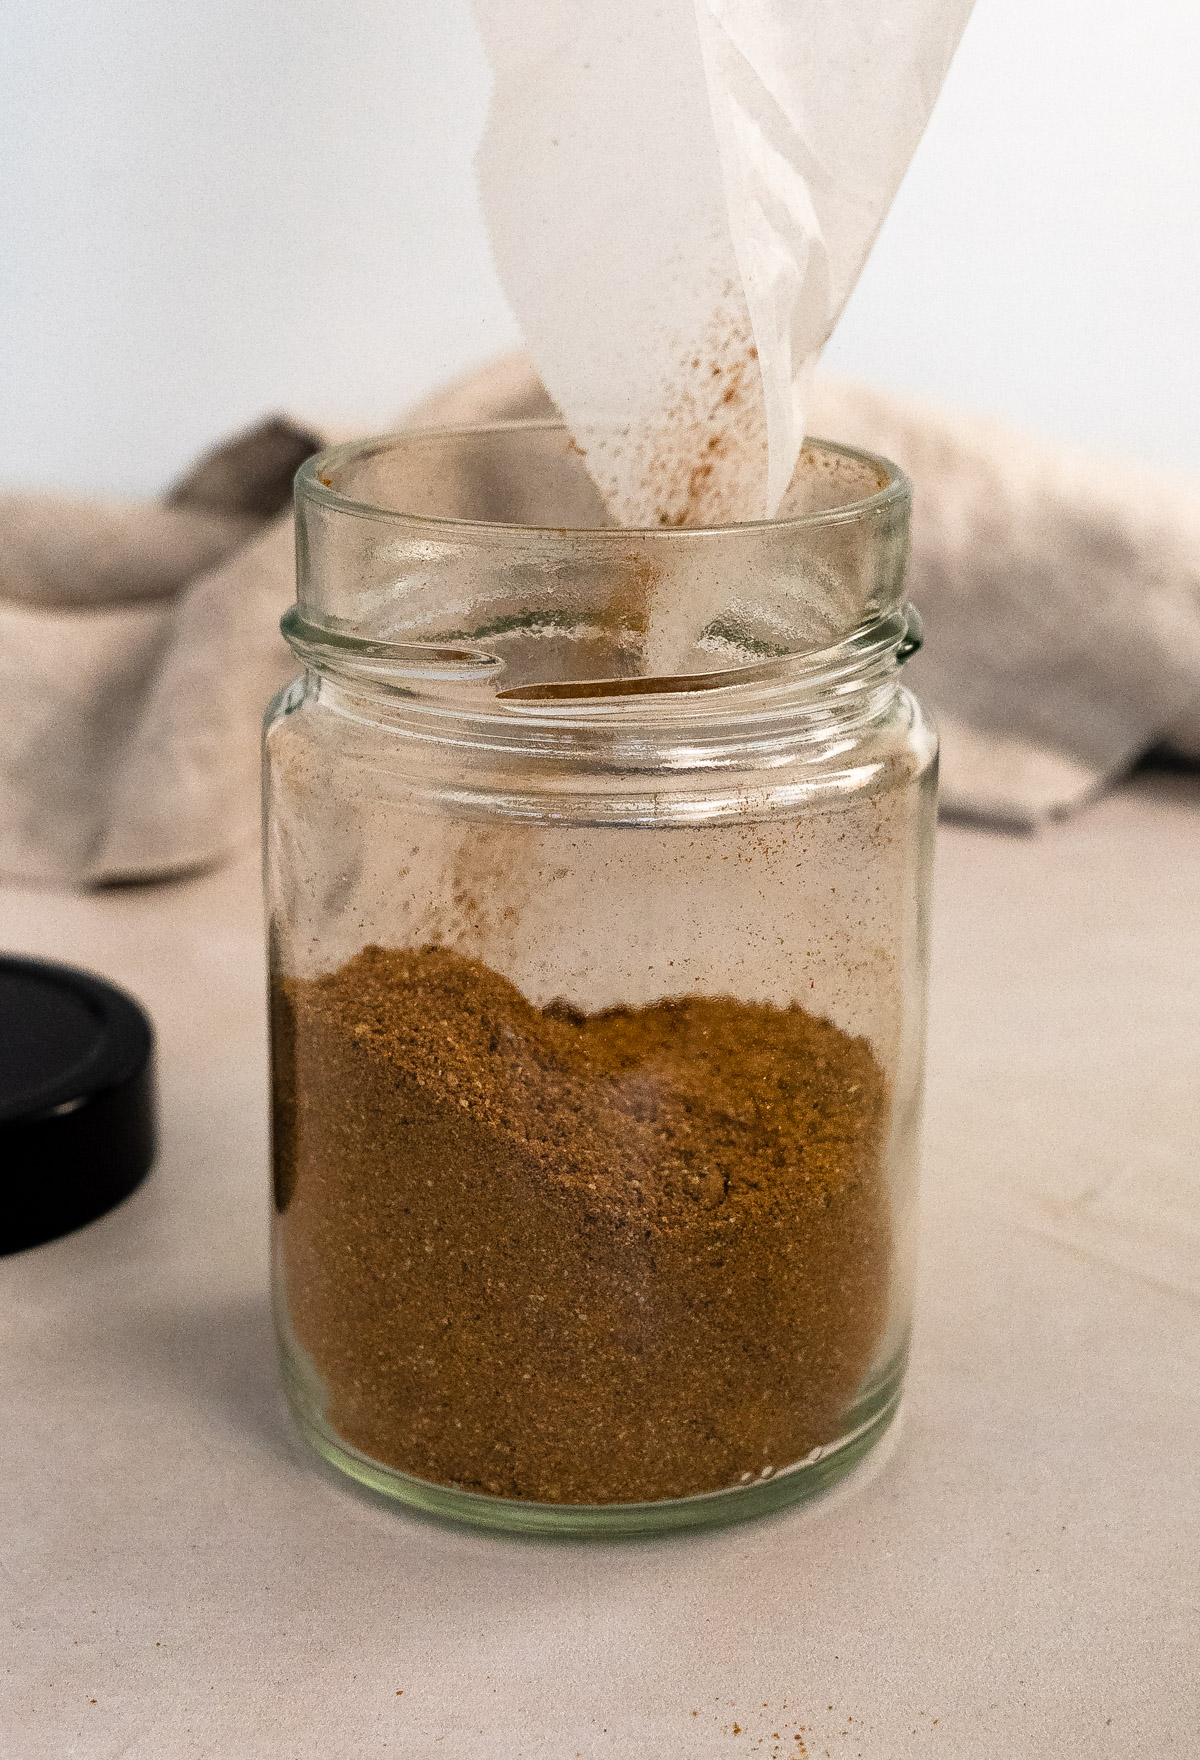 pouring spices into a clear glass jar